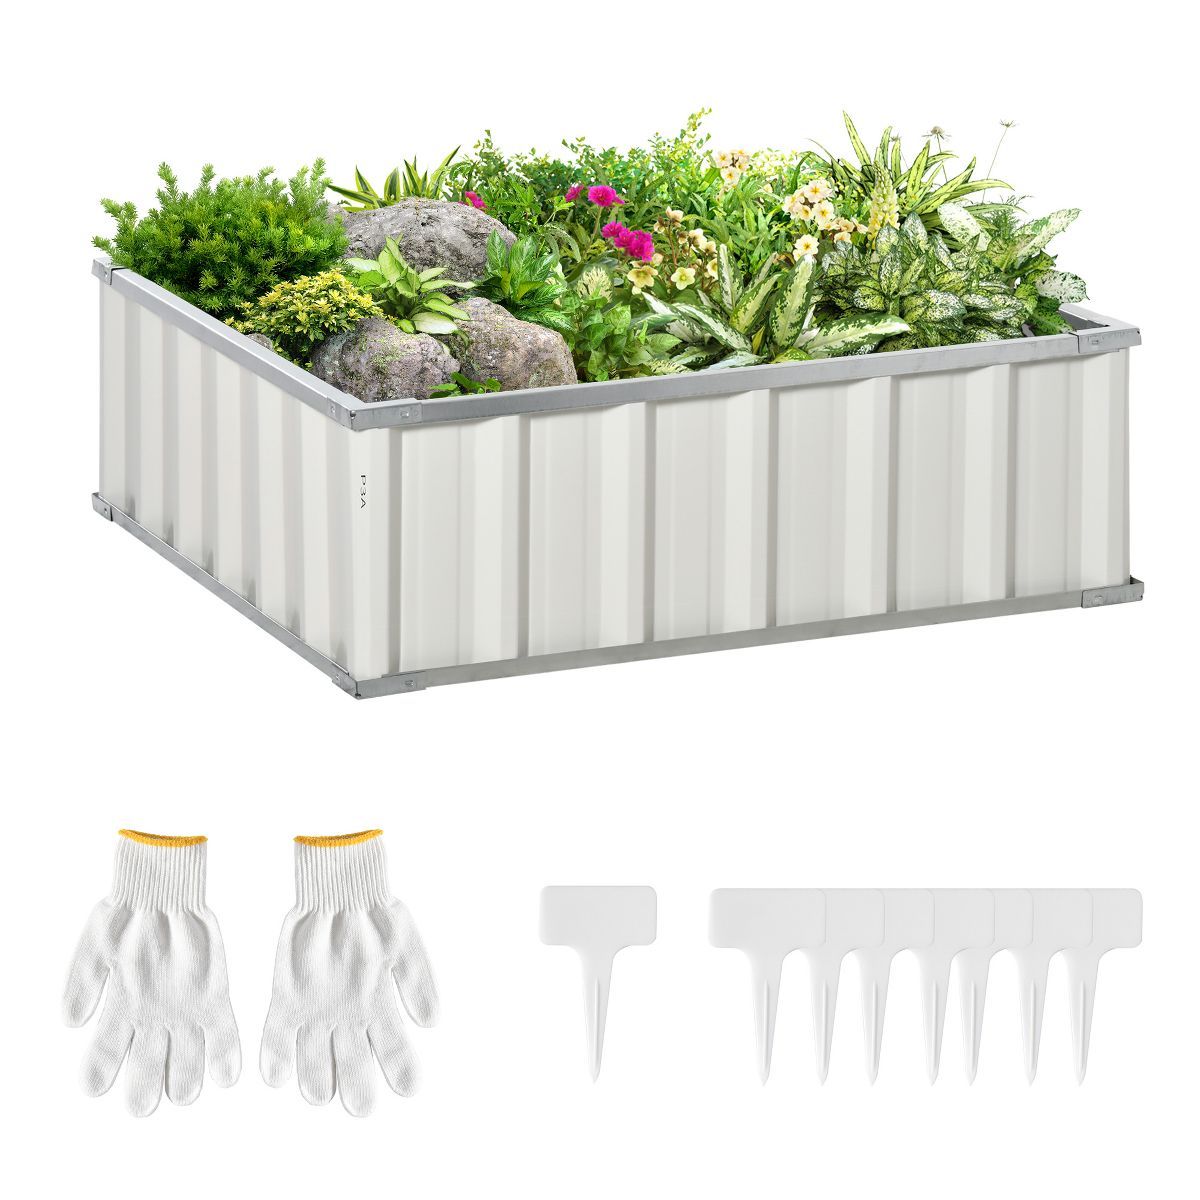 Outsunny 3x3ft Galvanized Raised Garden Bed, Metal Planter for Outdoor Plants, No Bottom w/ A Pai... | Target